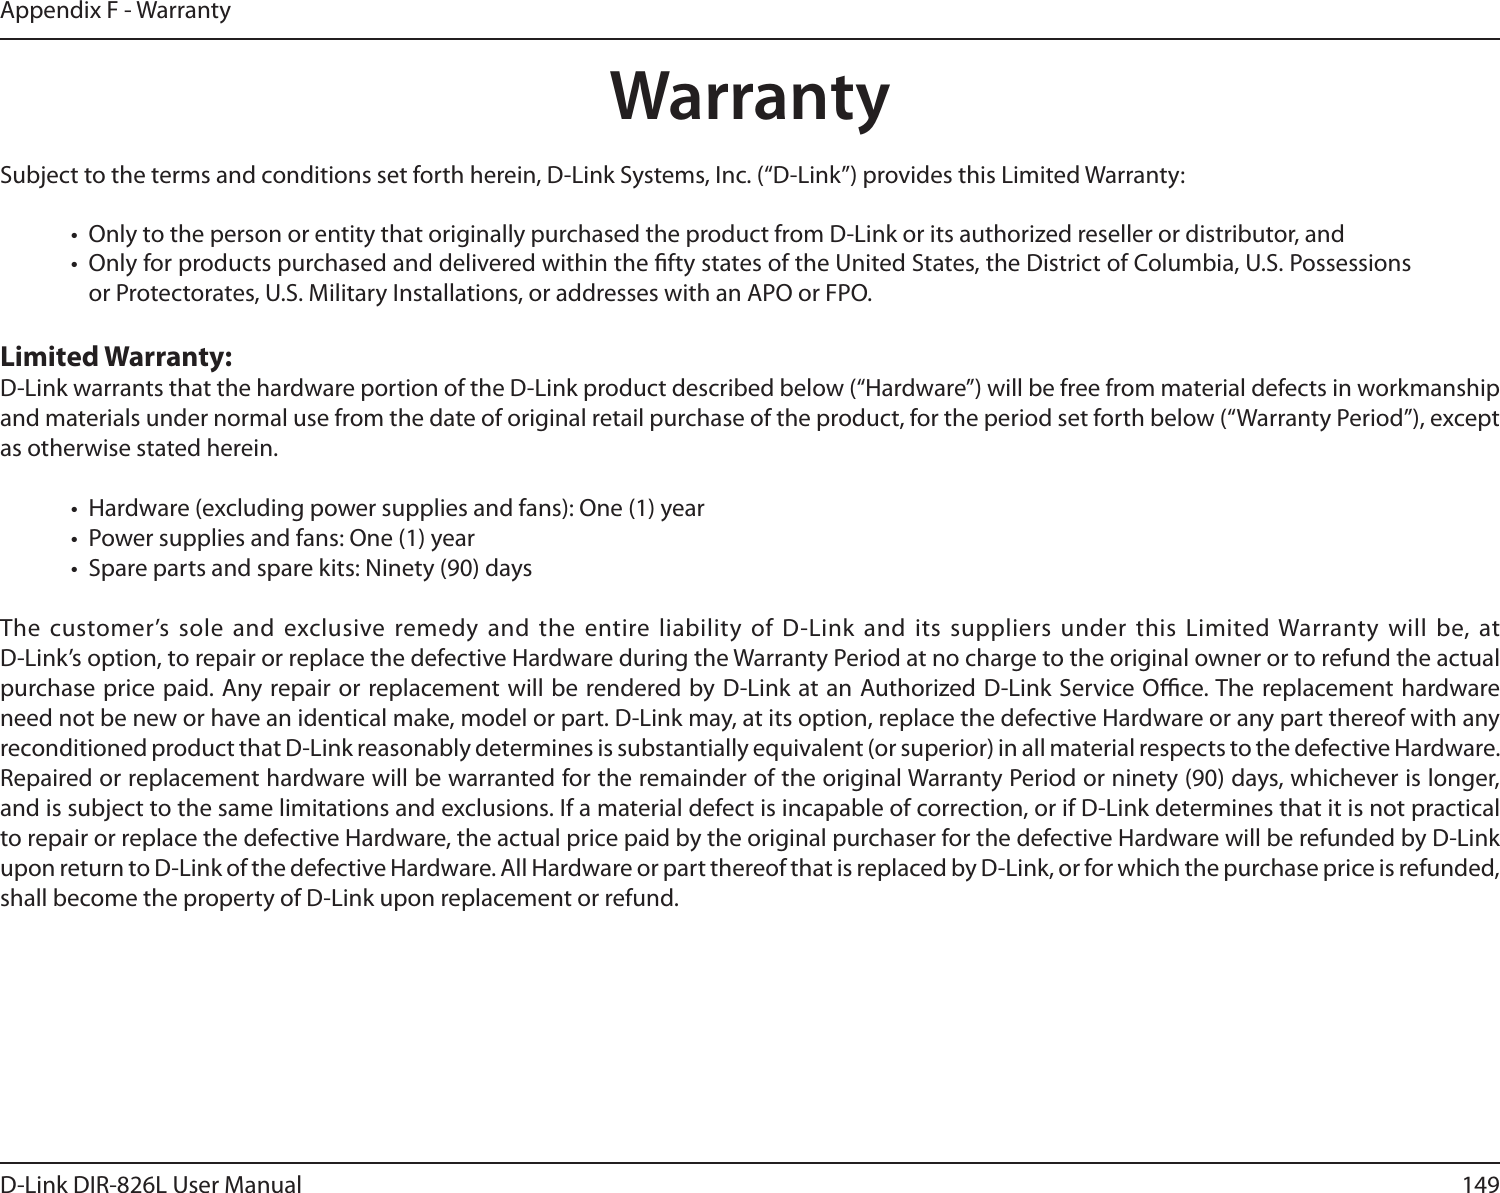 149D-Link DIR-826L User ManualAppendix F - WarrantyWarrantySubject to the terms and conditions set forth herein, D-Link Systems, Inc. (“D-Link”) provides this Limited Warranty:•  Only to the person or entity that originally purchased the product from D-Link or its authorized reseller or distributor, and•  Only for products purchased and delivered within the fty states of the United States, the District of Columbia, U.S. Possessions or Protectorates, U.S. Military Installations, or addresses with an APO or FPO.Limited Warranty:D-Link warrants that the hardware portion of the D-Link product described below (“Hardware”) will be free from material defects in workmanship and materials under normal use from the date of original retail purchase of the product, for the period set forth below (“Warranty Period”), except as otherwise stated herein.•  Hardware (excluding power supplies and fans): One (1) year•  Power supplies and fans: One (1) year•  Spare parts and spare kits: Ninety (90) daysThe customer’s sole and  exclusive  remedy and the entire liability of D-Link and  its suppliers under  this Limited Warranty will be, at  D-Link’s option, to repair or replace the defective Hardware during the Warranty Period at no charge to the original owner or to refund the actual purchase price paid. Any repair or replacement will be rendered by D-Link at an Authorized D-Link Service Oce. The replacement hardware need not be new or have an identical make, model or part. D-Link may, at its option, replace the defective Hardware or any part thereof with any reconditioned product that D-Link reasonably determines is substantially equivalent (or superior) in all material respects to the defective Hardware. Repaired or replacement hardware will be warranted for the remainder of the original Warranty Period or ninety (90) days, whichever is longer, and is subject to the same limitations and exclusions. If a material defect is incapable of correction, or if D-Link determines that it is not practical to repair or replace the defective Hardware, the actual price paid by the original purchaser for the defective Hardware will be refunded by D-Link upon return to D-Link of the defective Hardware. All Hardware or part thereof that is replaced by D-Link, or for which the purchase price is refunded, shall become the property of D-Link upon replacement or refund.